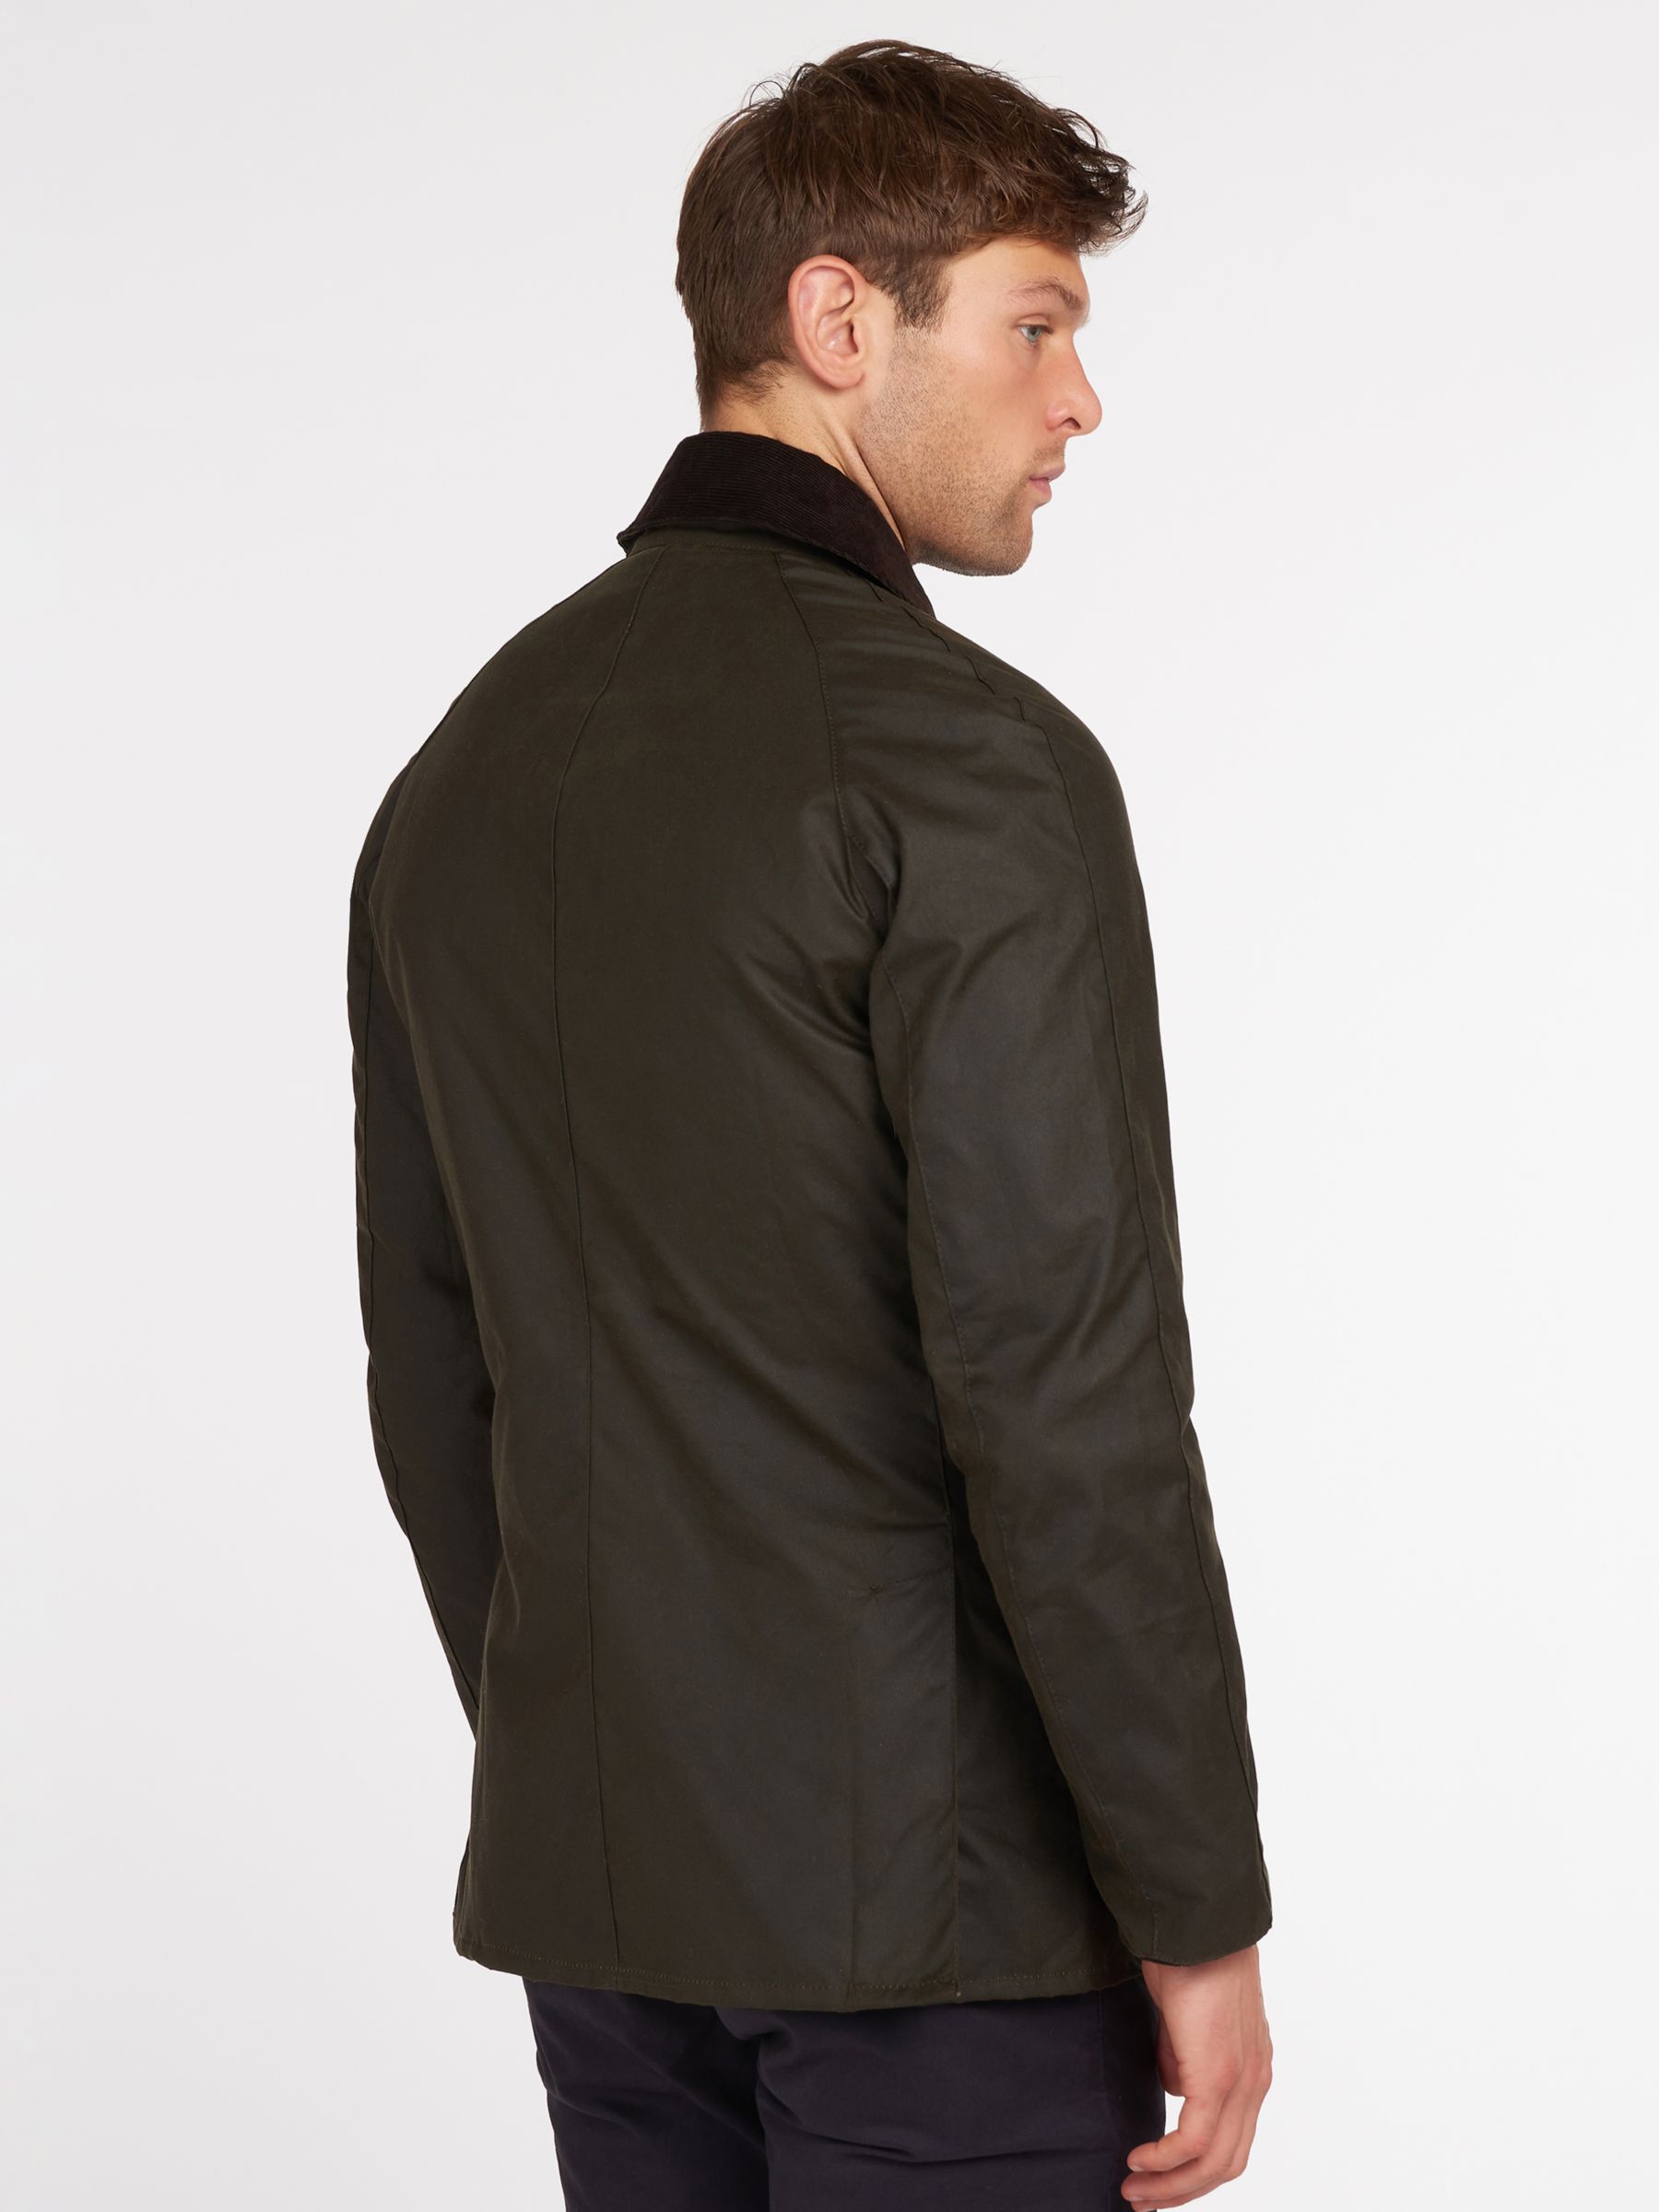 Buy Barbour Ashby Waxed Cotton Field Jacket, Olive Online at johnlewis.com